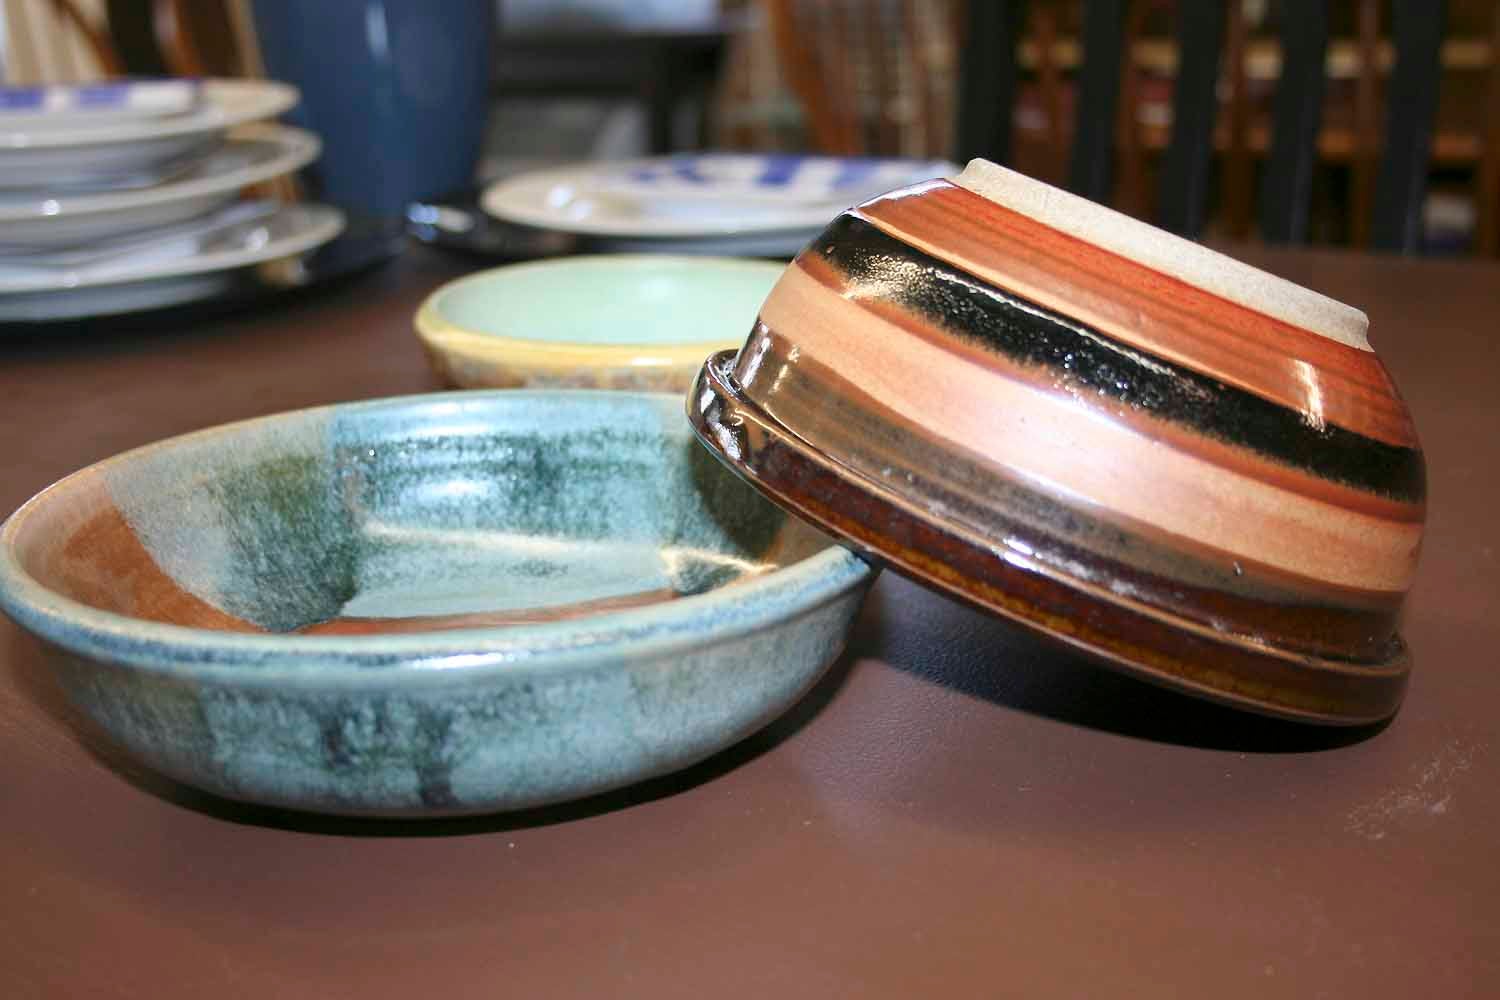 Community members, students and local celebrities crafted bowls for this year's luncheon.